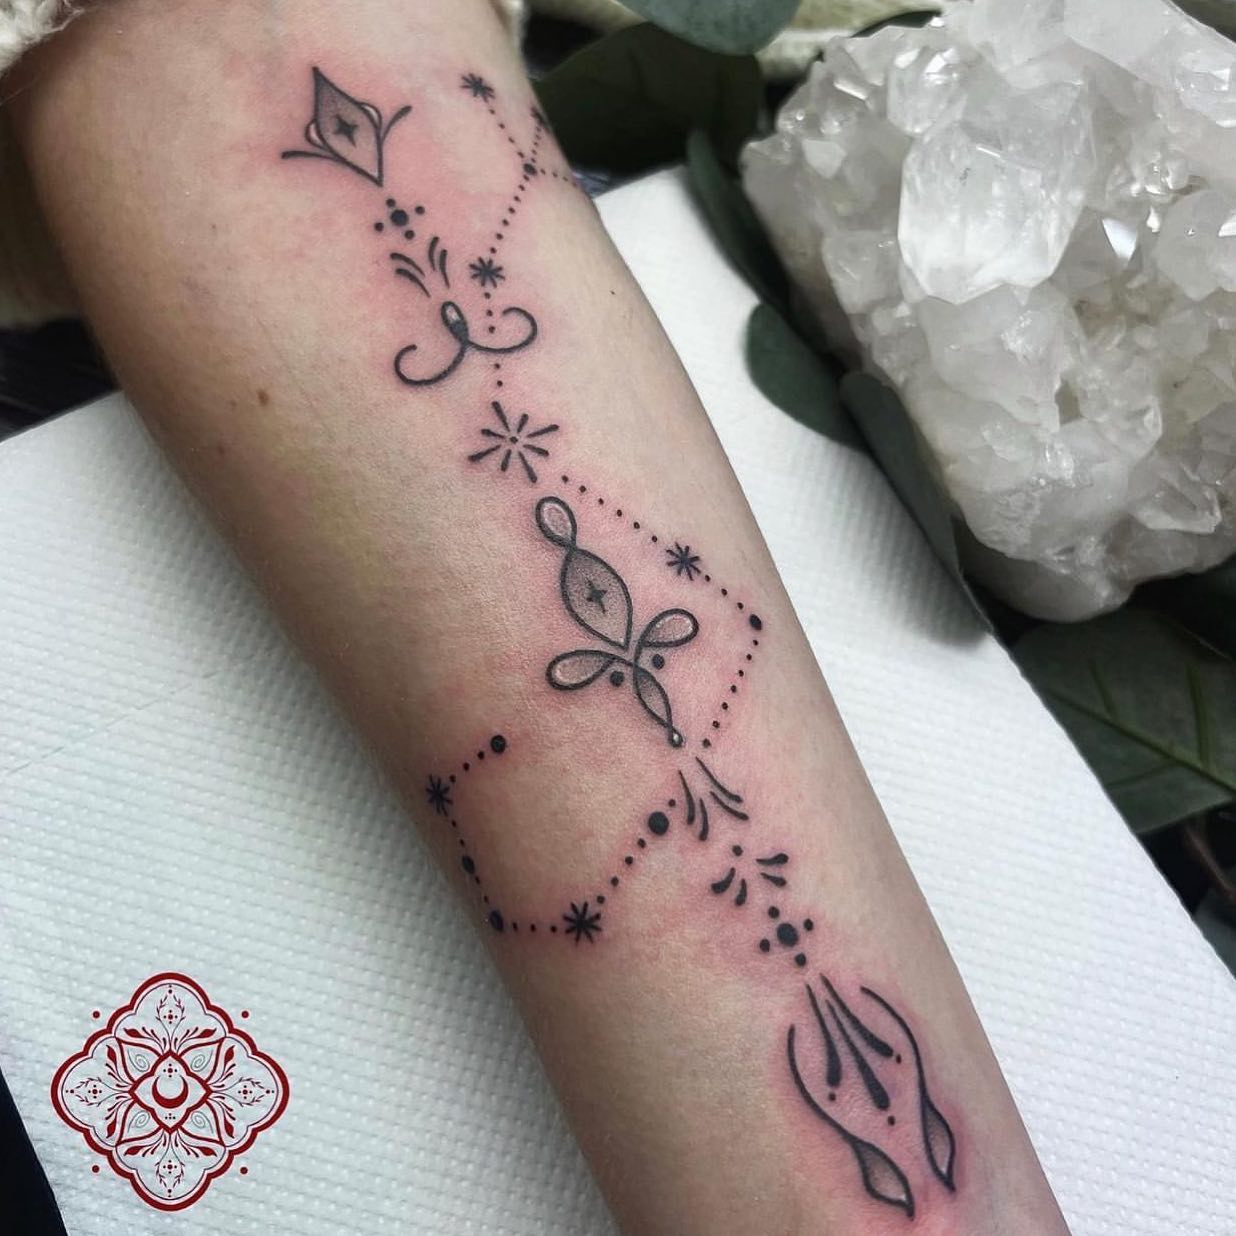 Cute little Scorpio constellation by our resident thaisblanc 💓

If you want to get tattooed by Thais please fill out the tattoo enquiry form on our website! 
______________________________________

                        barber_dts easytattoo_uk eternalink dynamiccolor lockdownneedle stencilstuff        